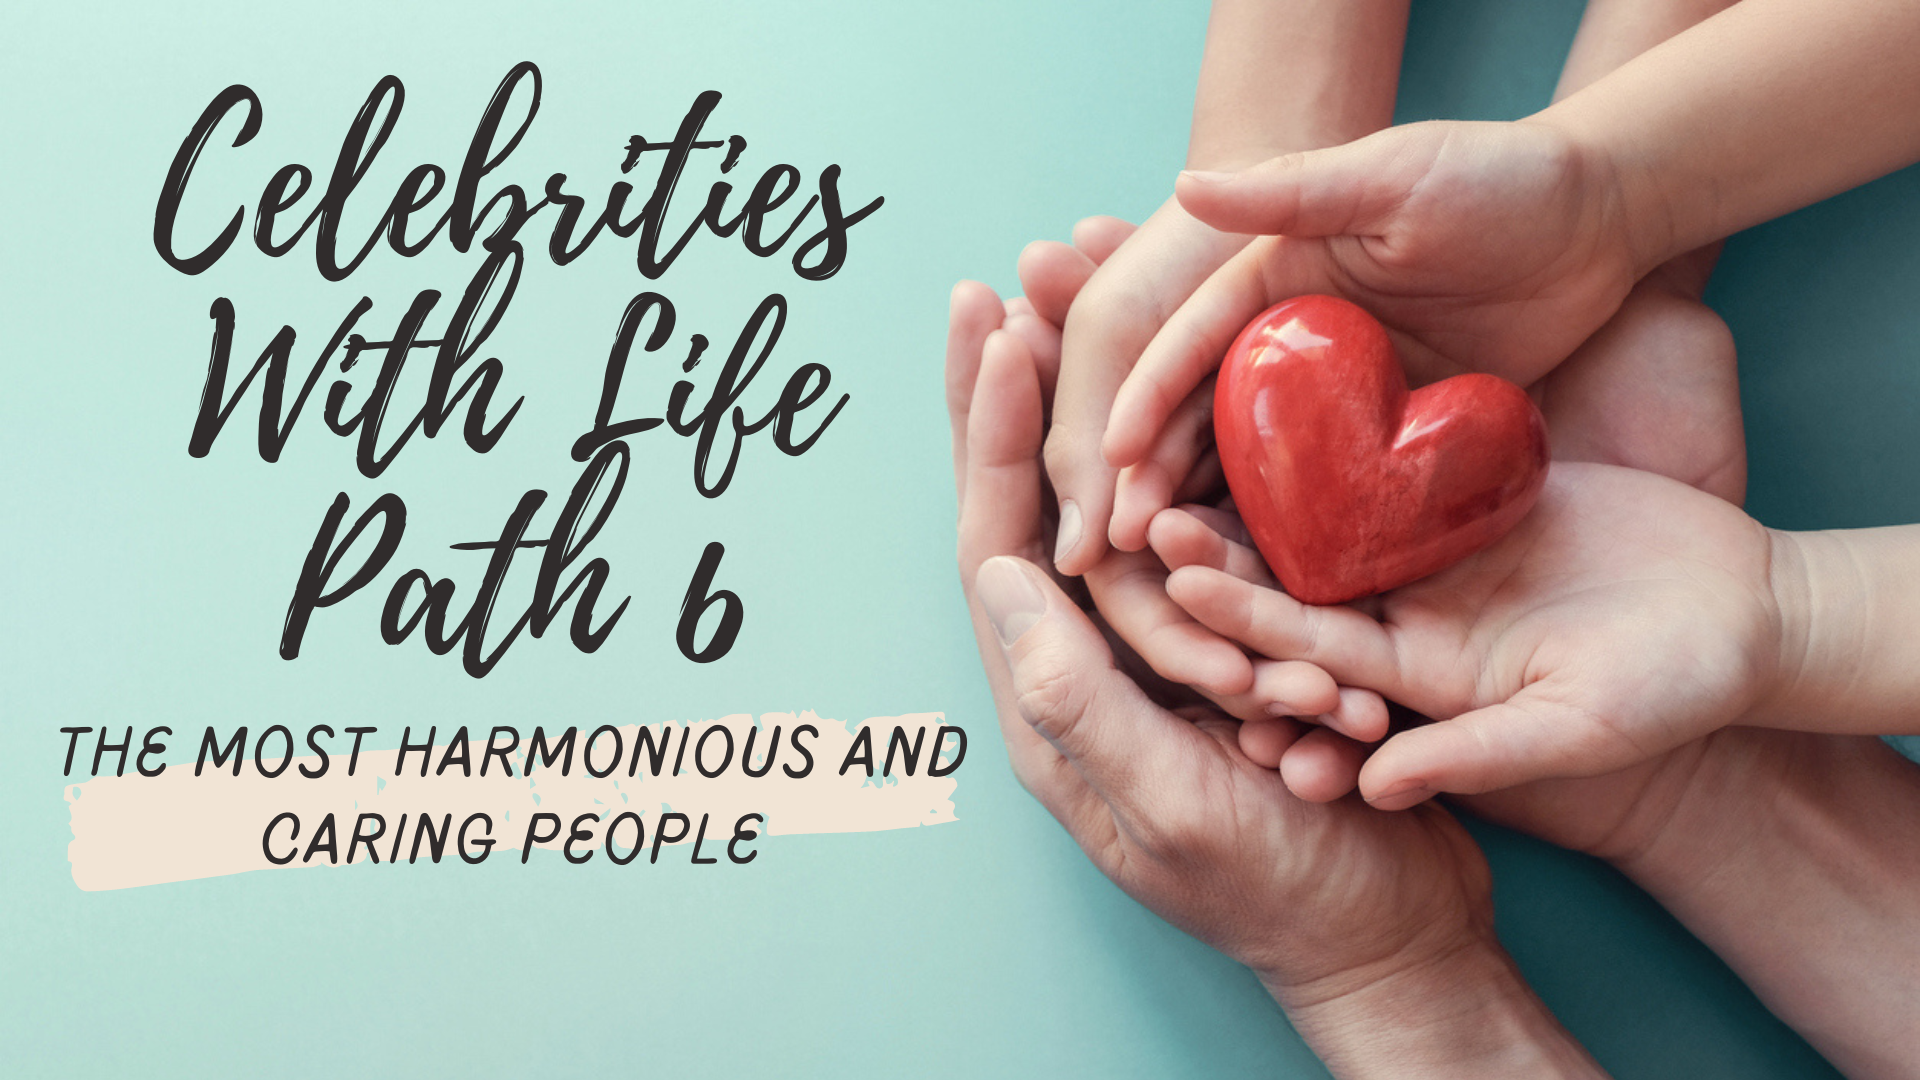 Celebrities With Life Path 6 - The Most Harmonious And Caring People